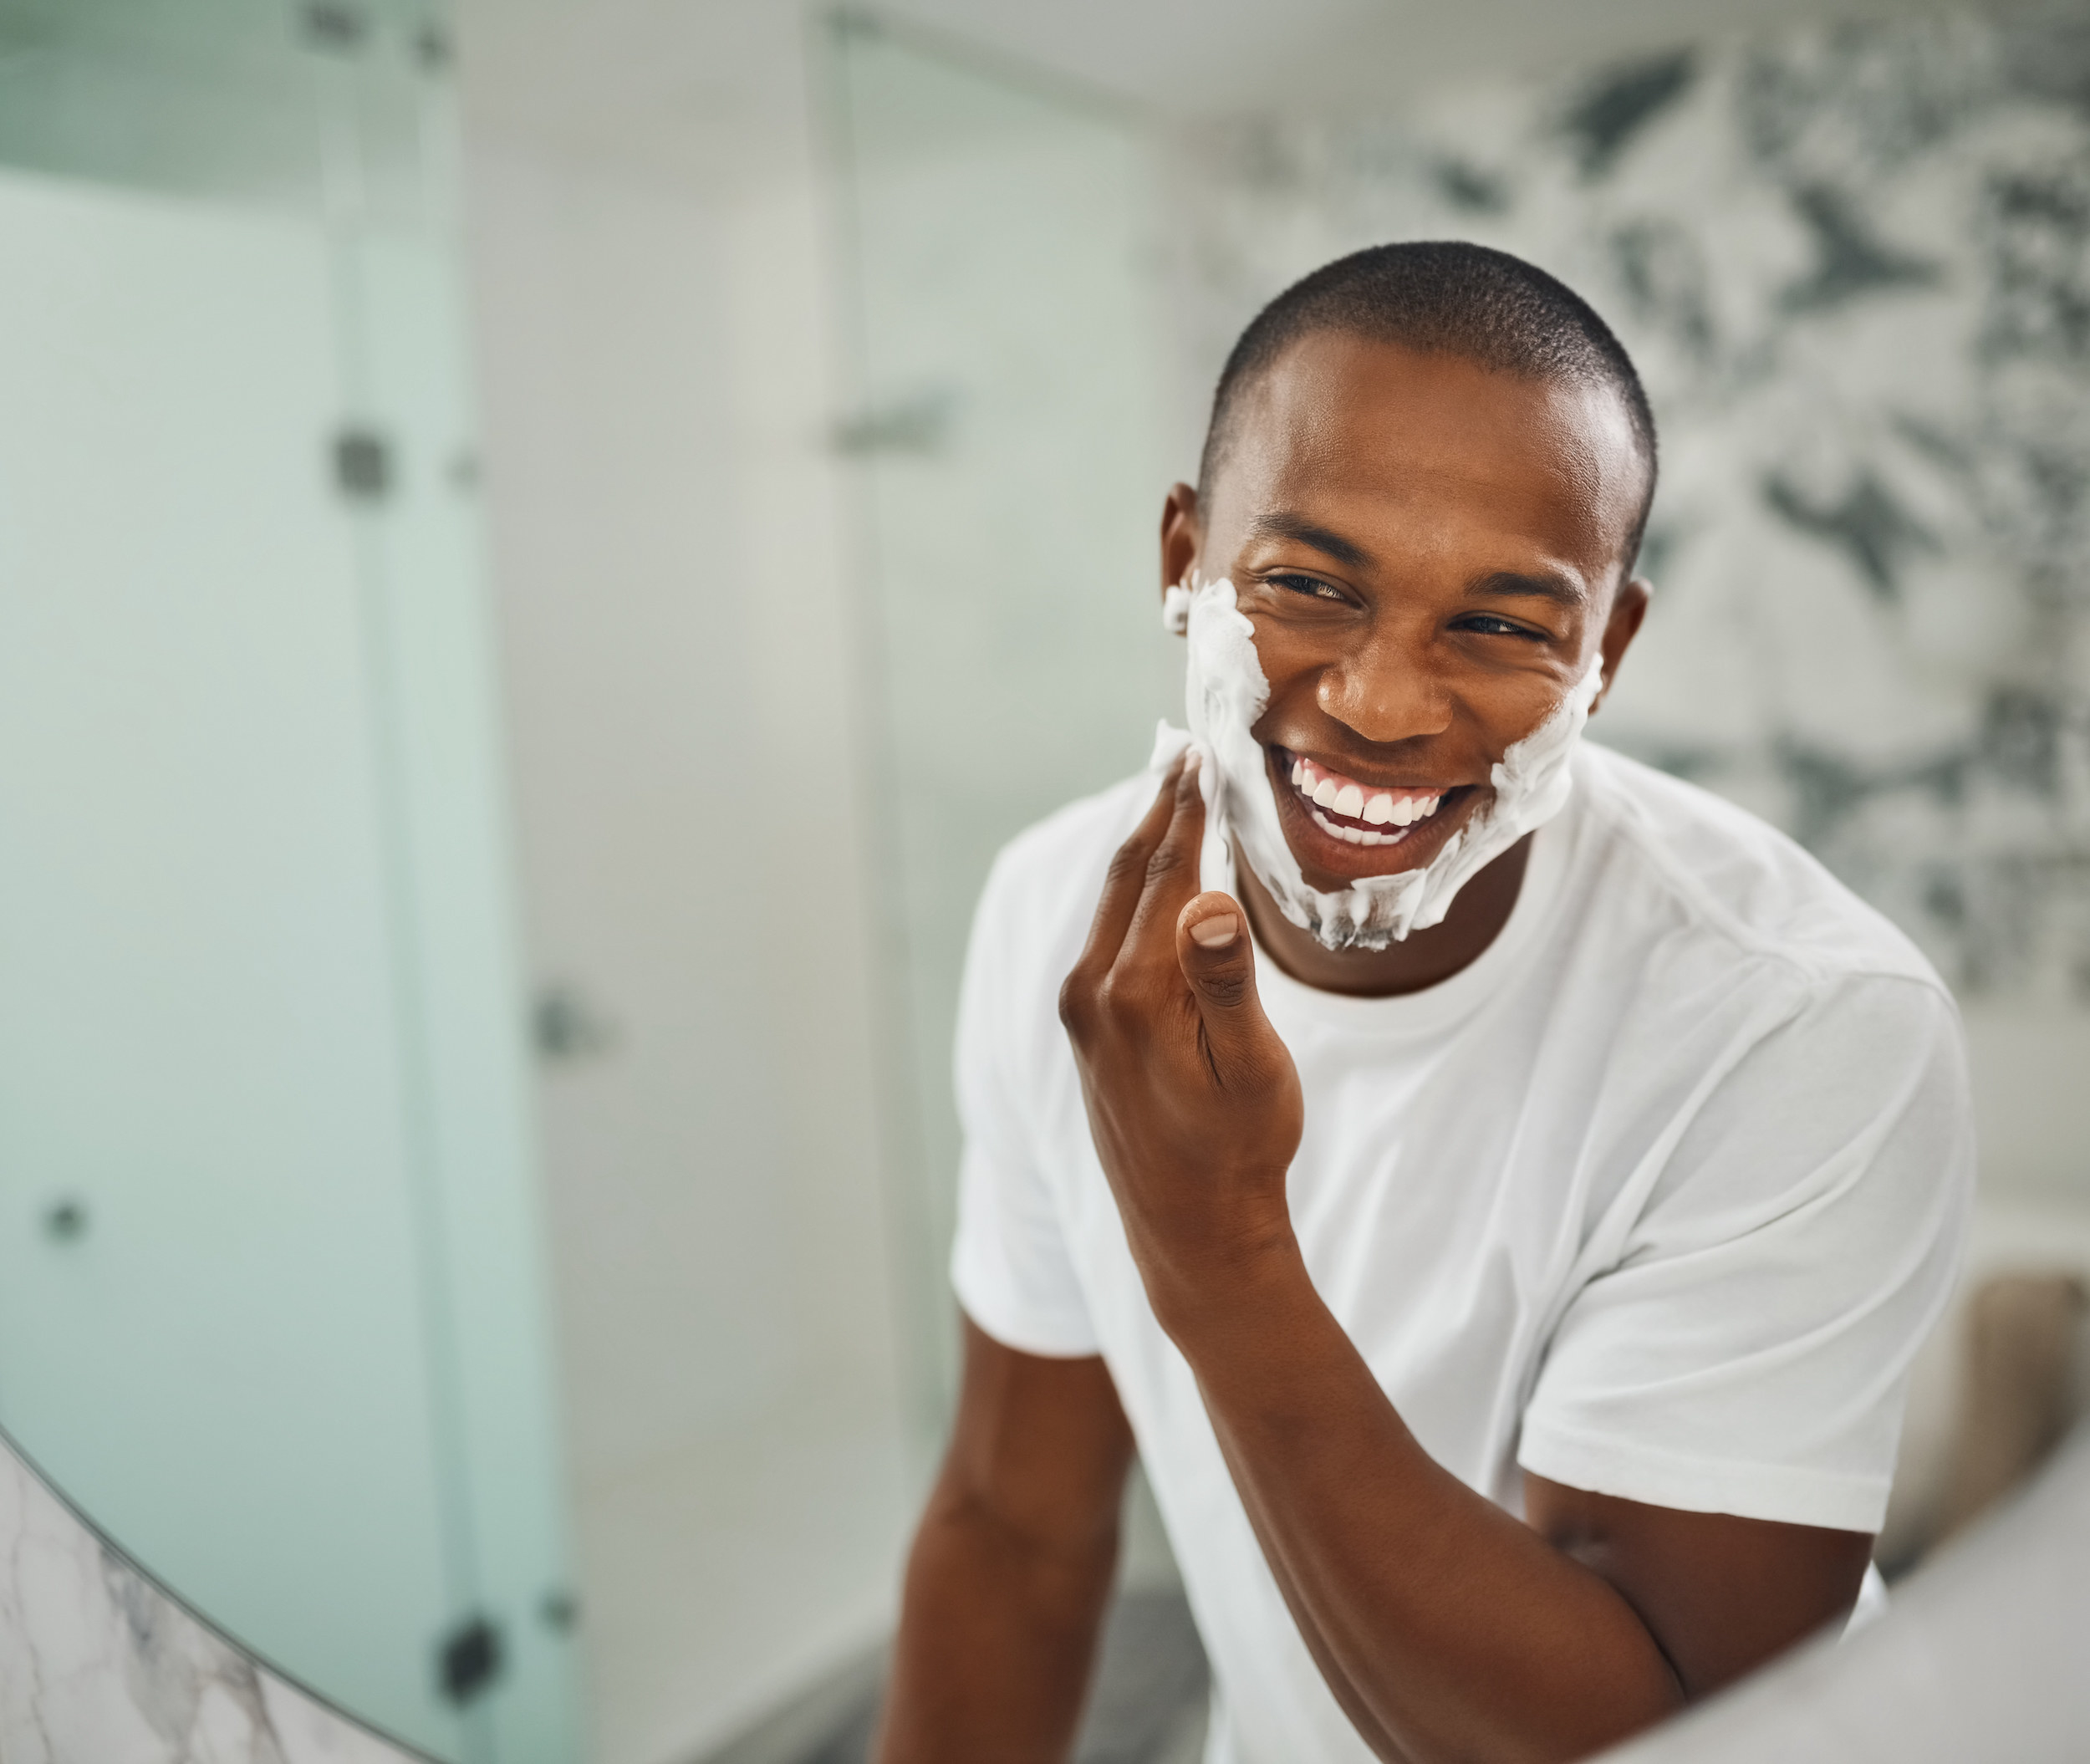 A man applying shaving cream to his face and smiling